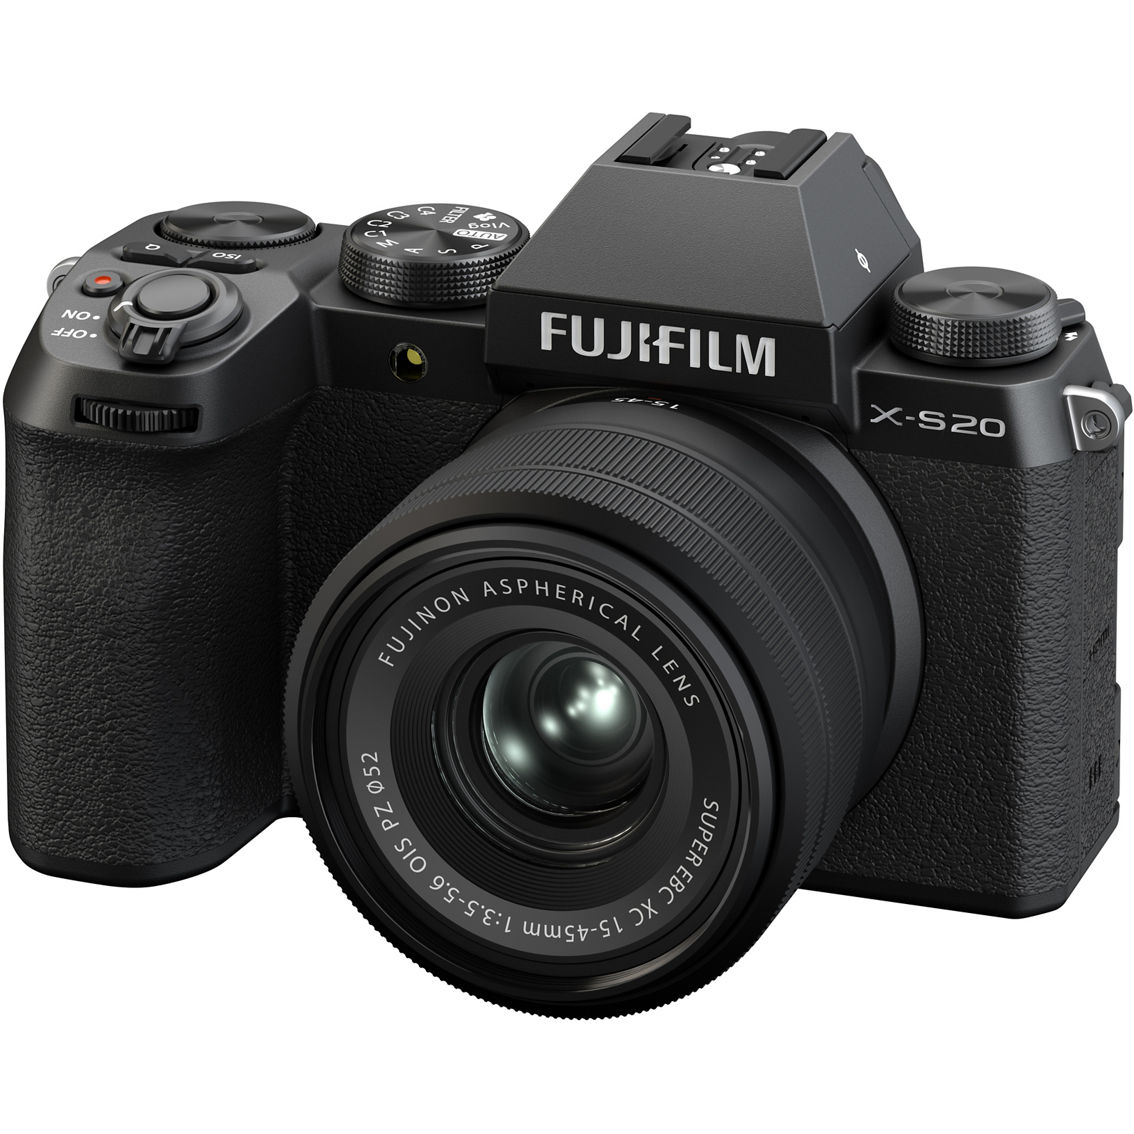 Fujifilm XS20 Mirrorless Camera with XC15 to 45mm F3.5 to 5.6 OIS PZ Lens Kit - Image 4 of 7